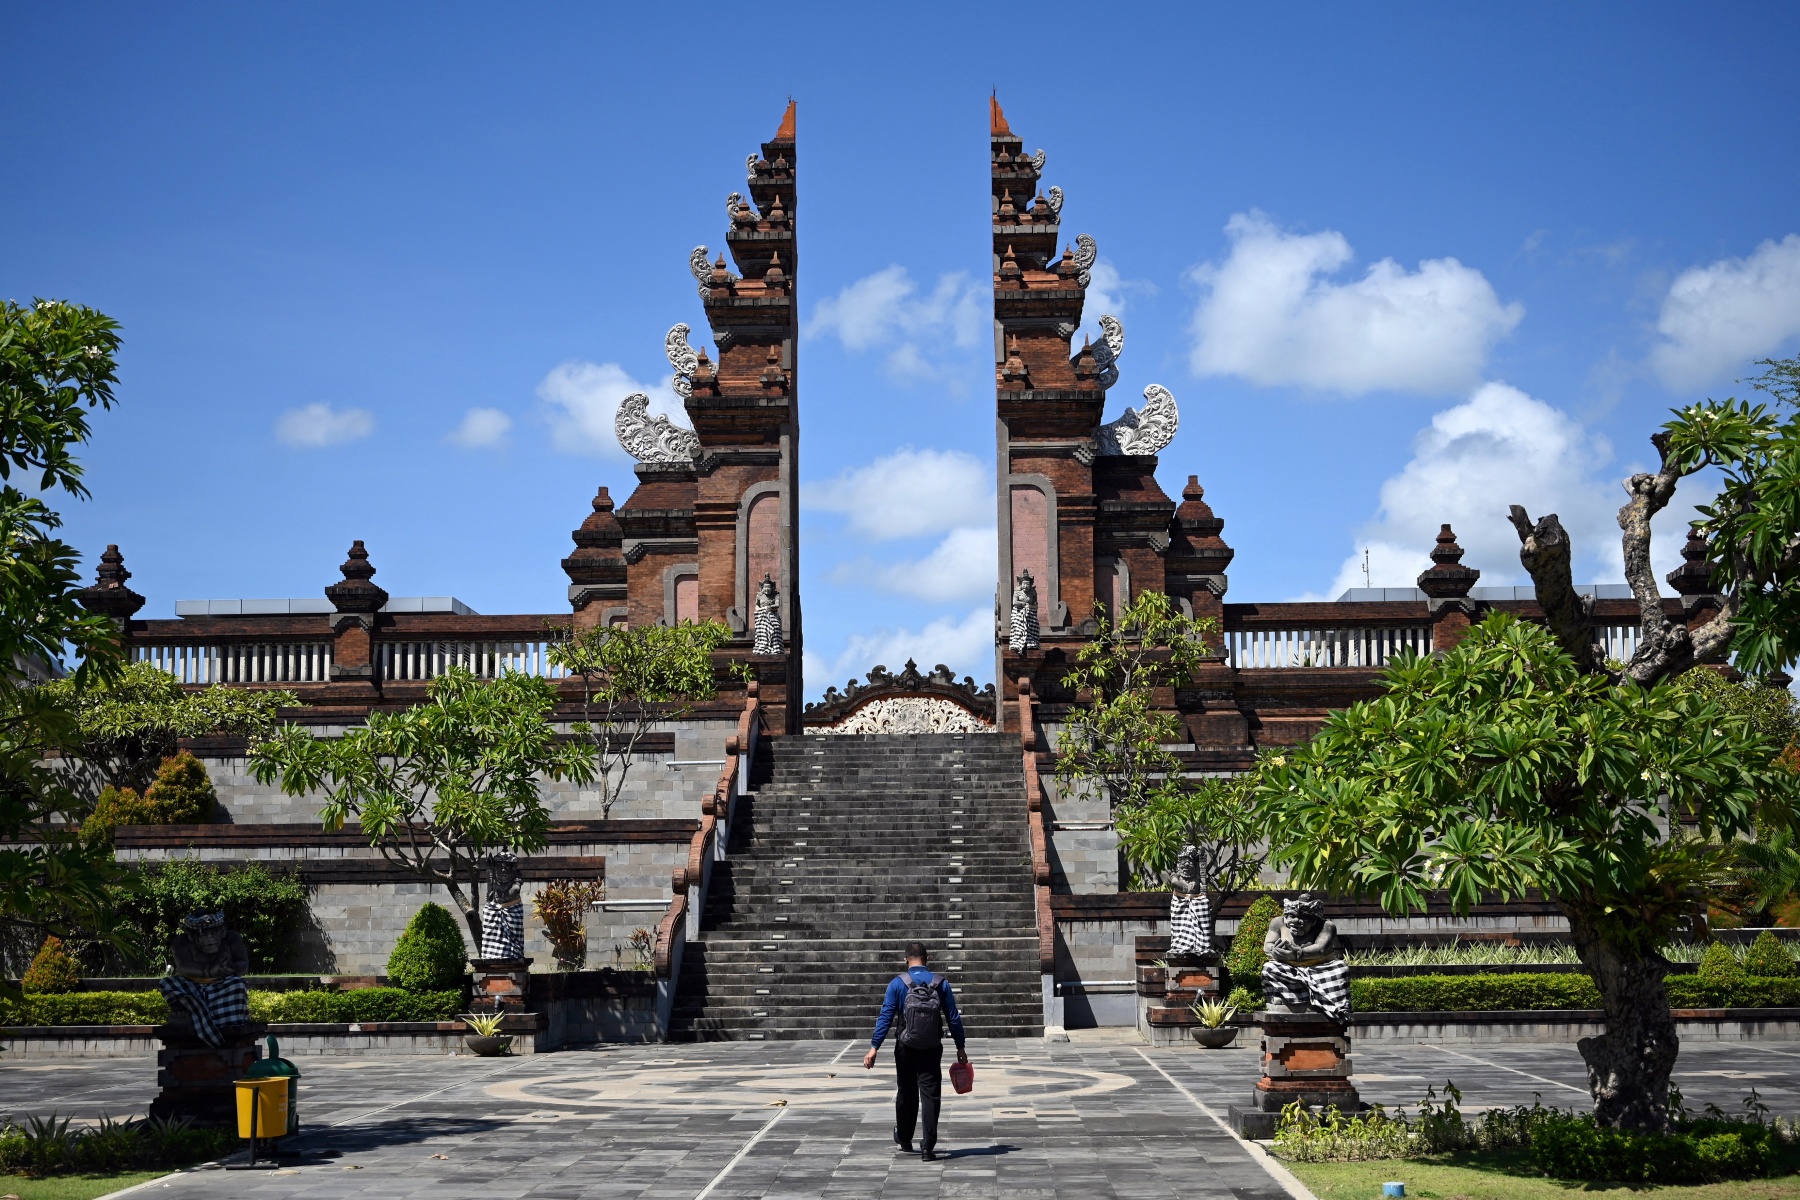 Graduates, you could live and work tax-free in Bali under new 'digital nomad visa'